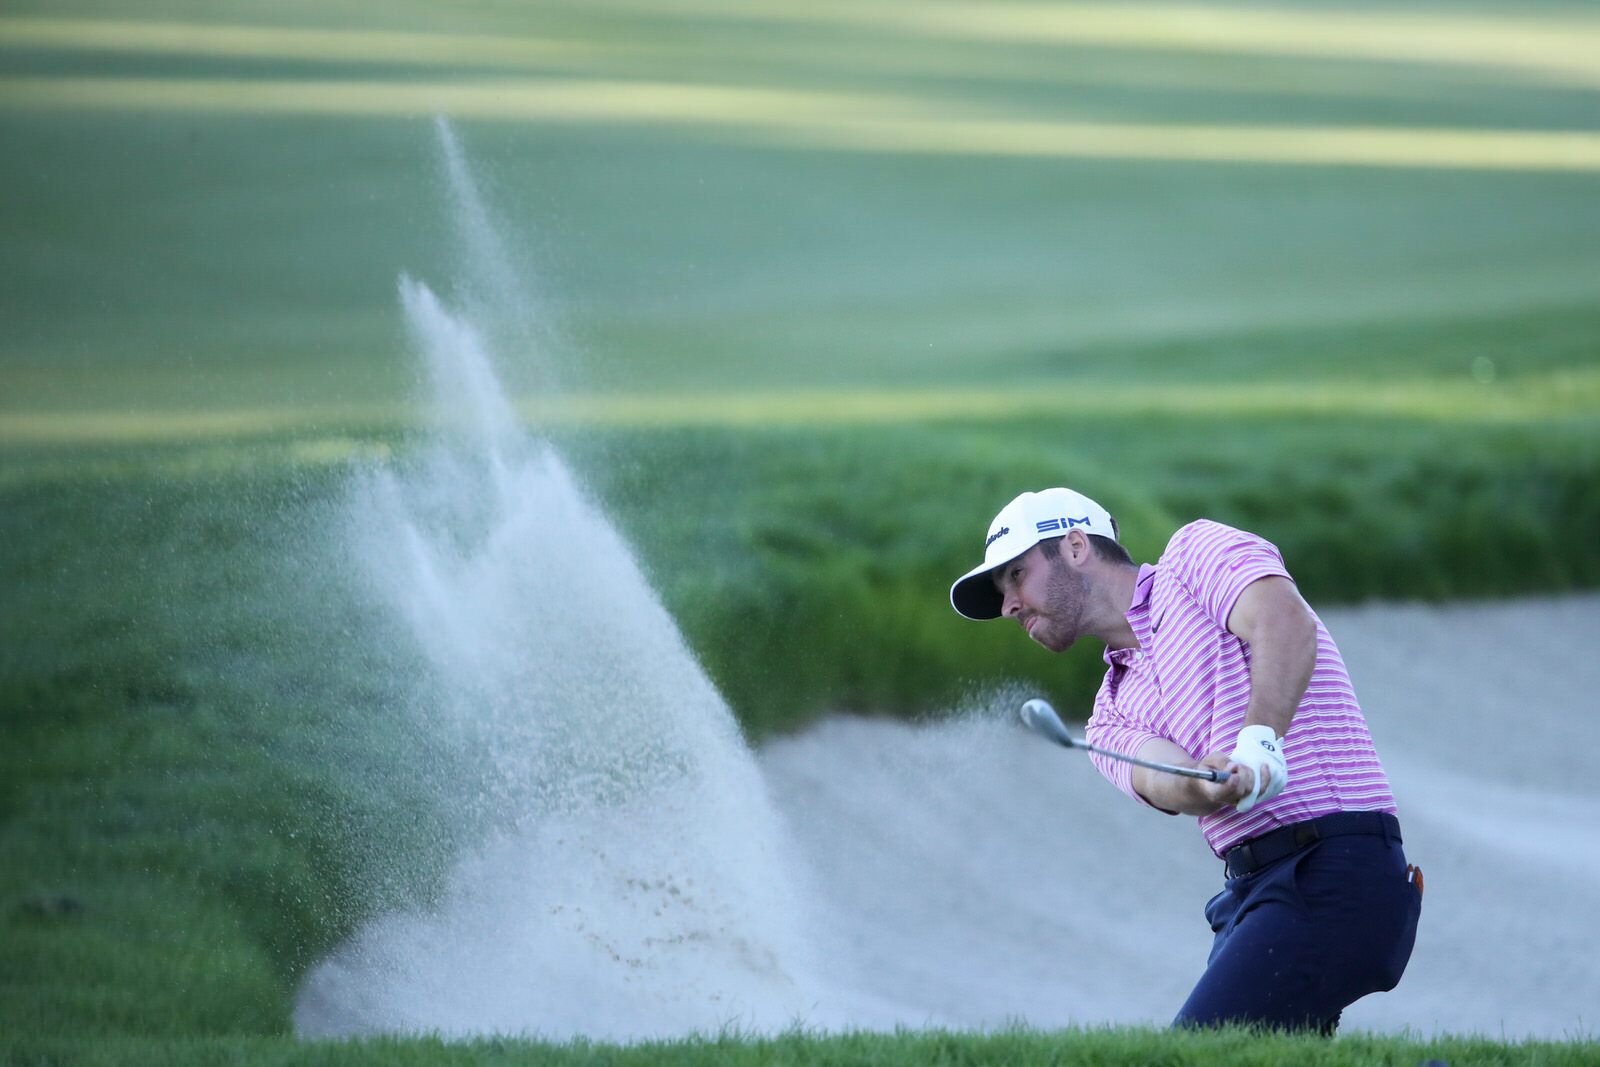  LAS VEGAS, NEVADA - OCTOBER 16: Matthew Wolff of the United States plays a shot from a bunker during the second round of the CJ Cup @ Shadow Creek on October 16, 2020 in Las Vegas, Nevada. (Photo by Christian Petersen/Getty Images) 